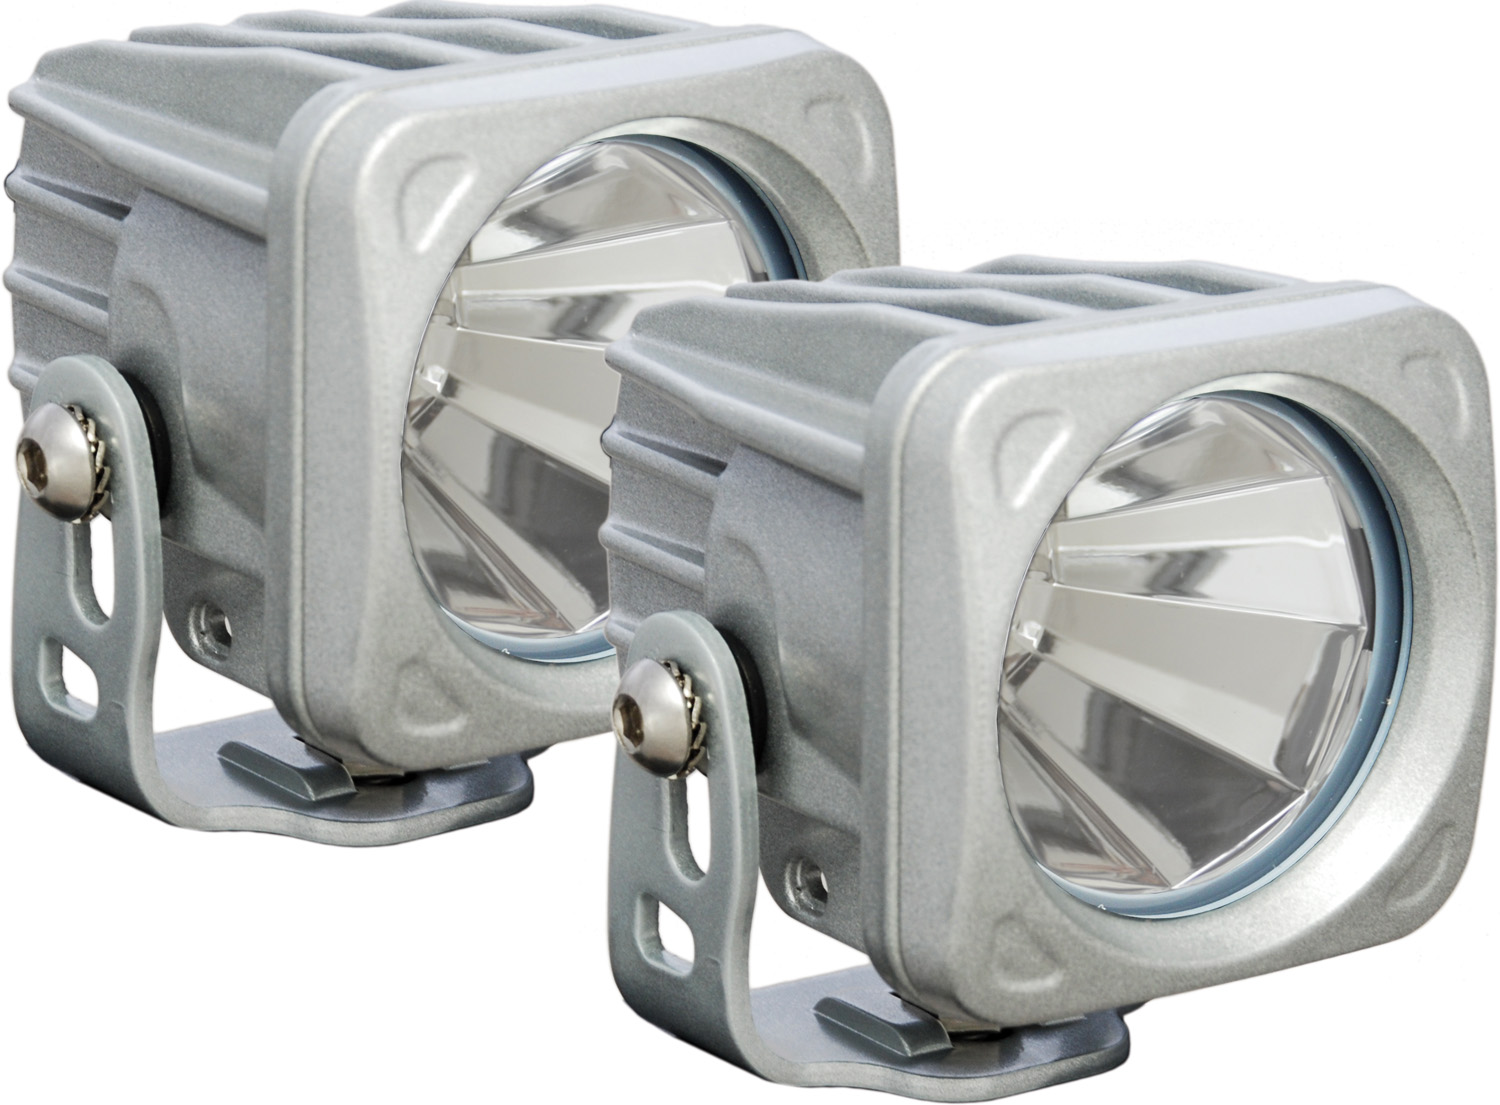 OPTIMUS SQUARE SILVER 1 10W LED 60° FLOOD KIT OF 2 LIGHTS - Click Image to Close